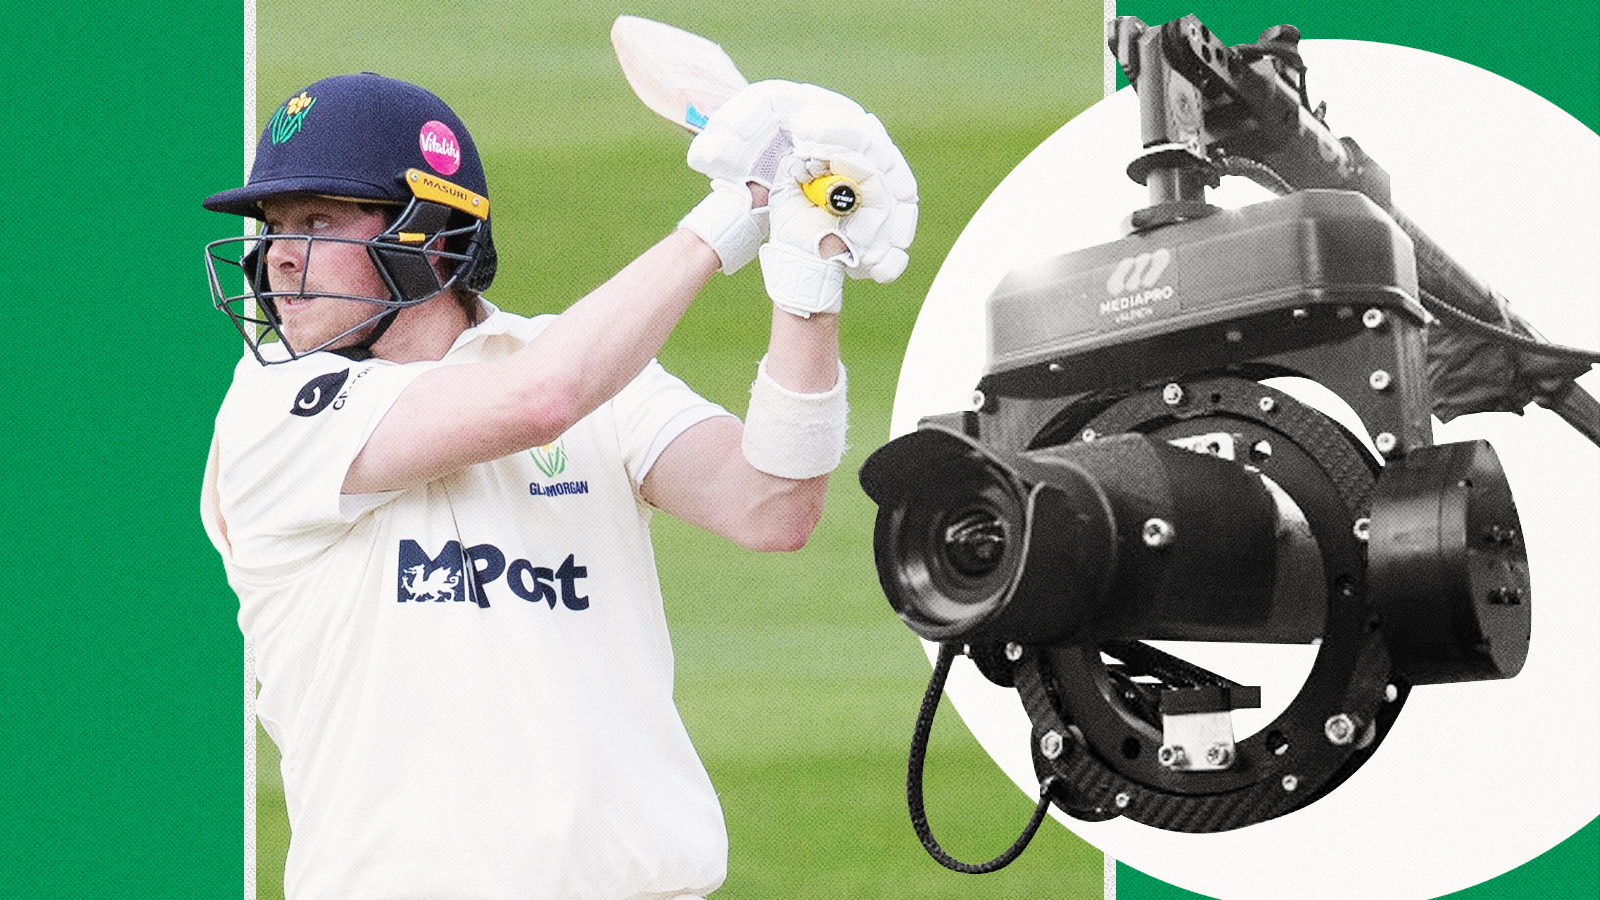 The pioneering AI camera system that could transform county cricket